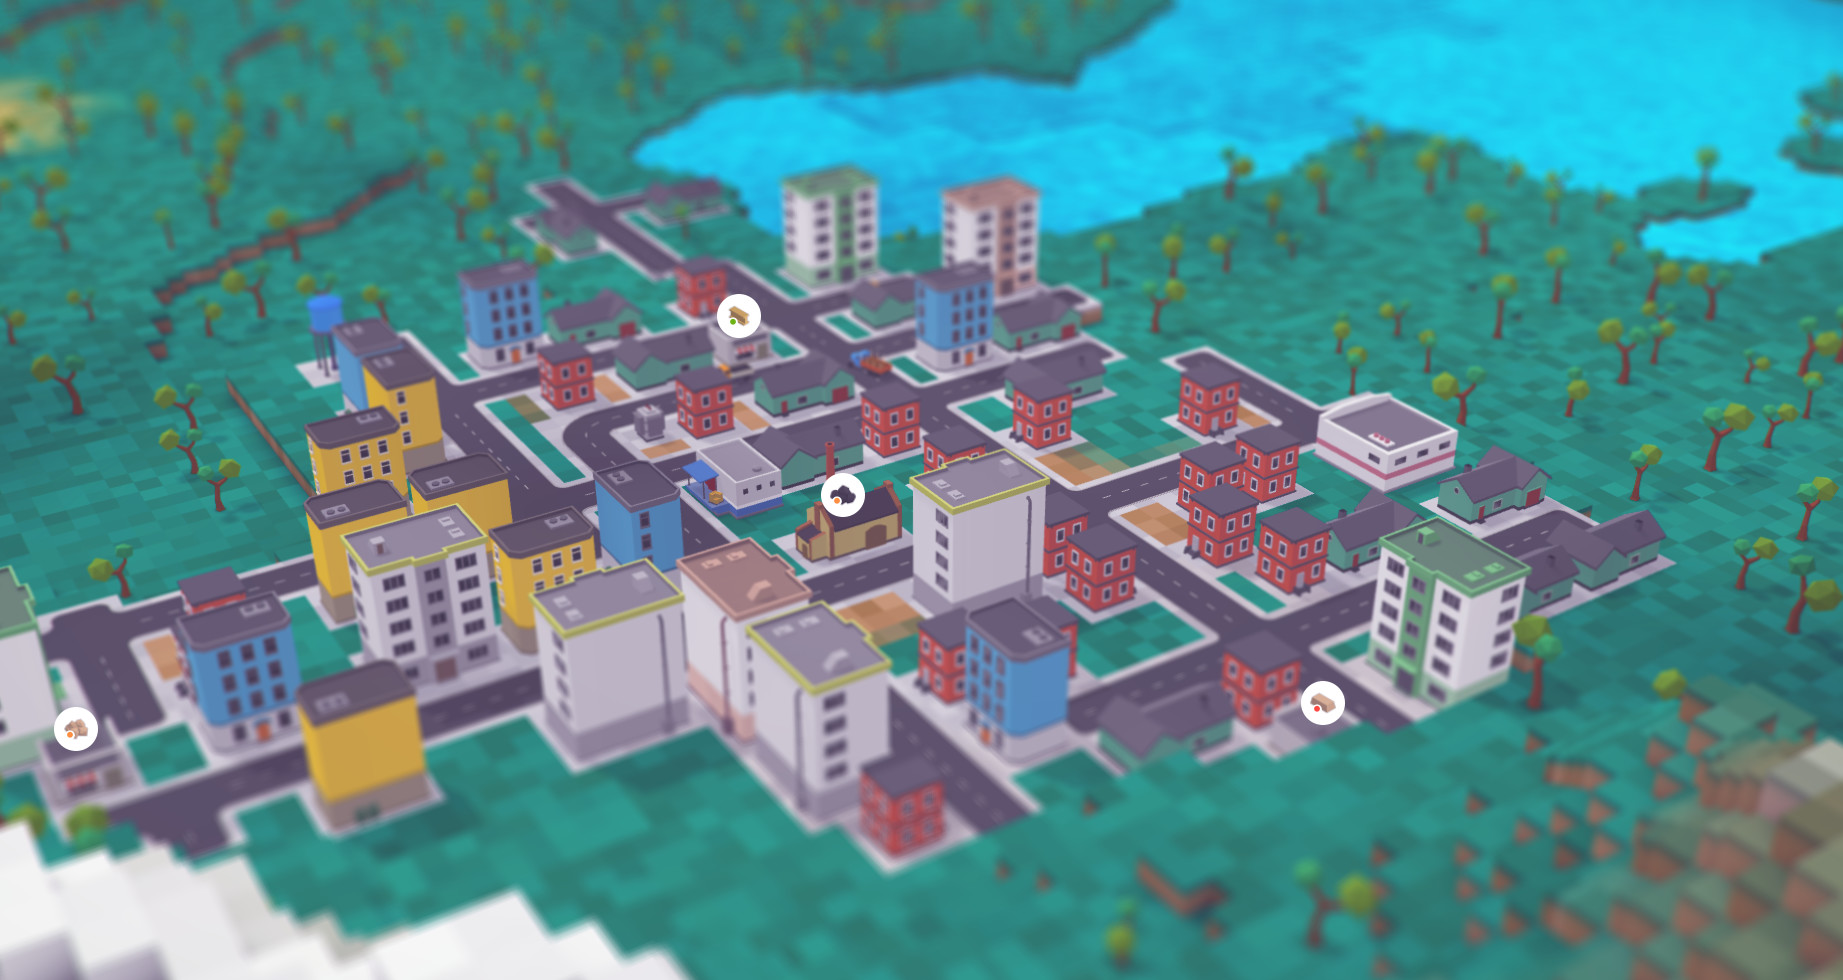 voxel tycoon intersection